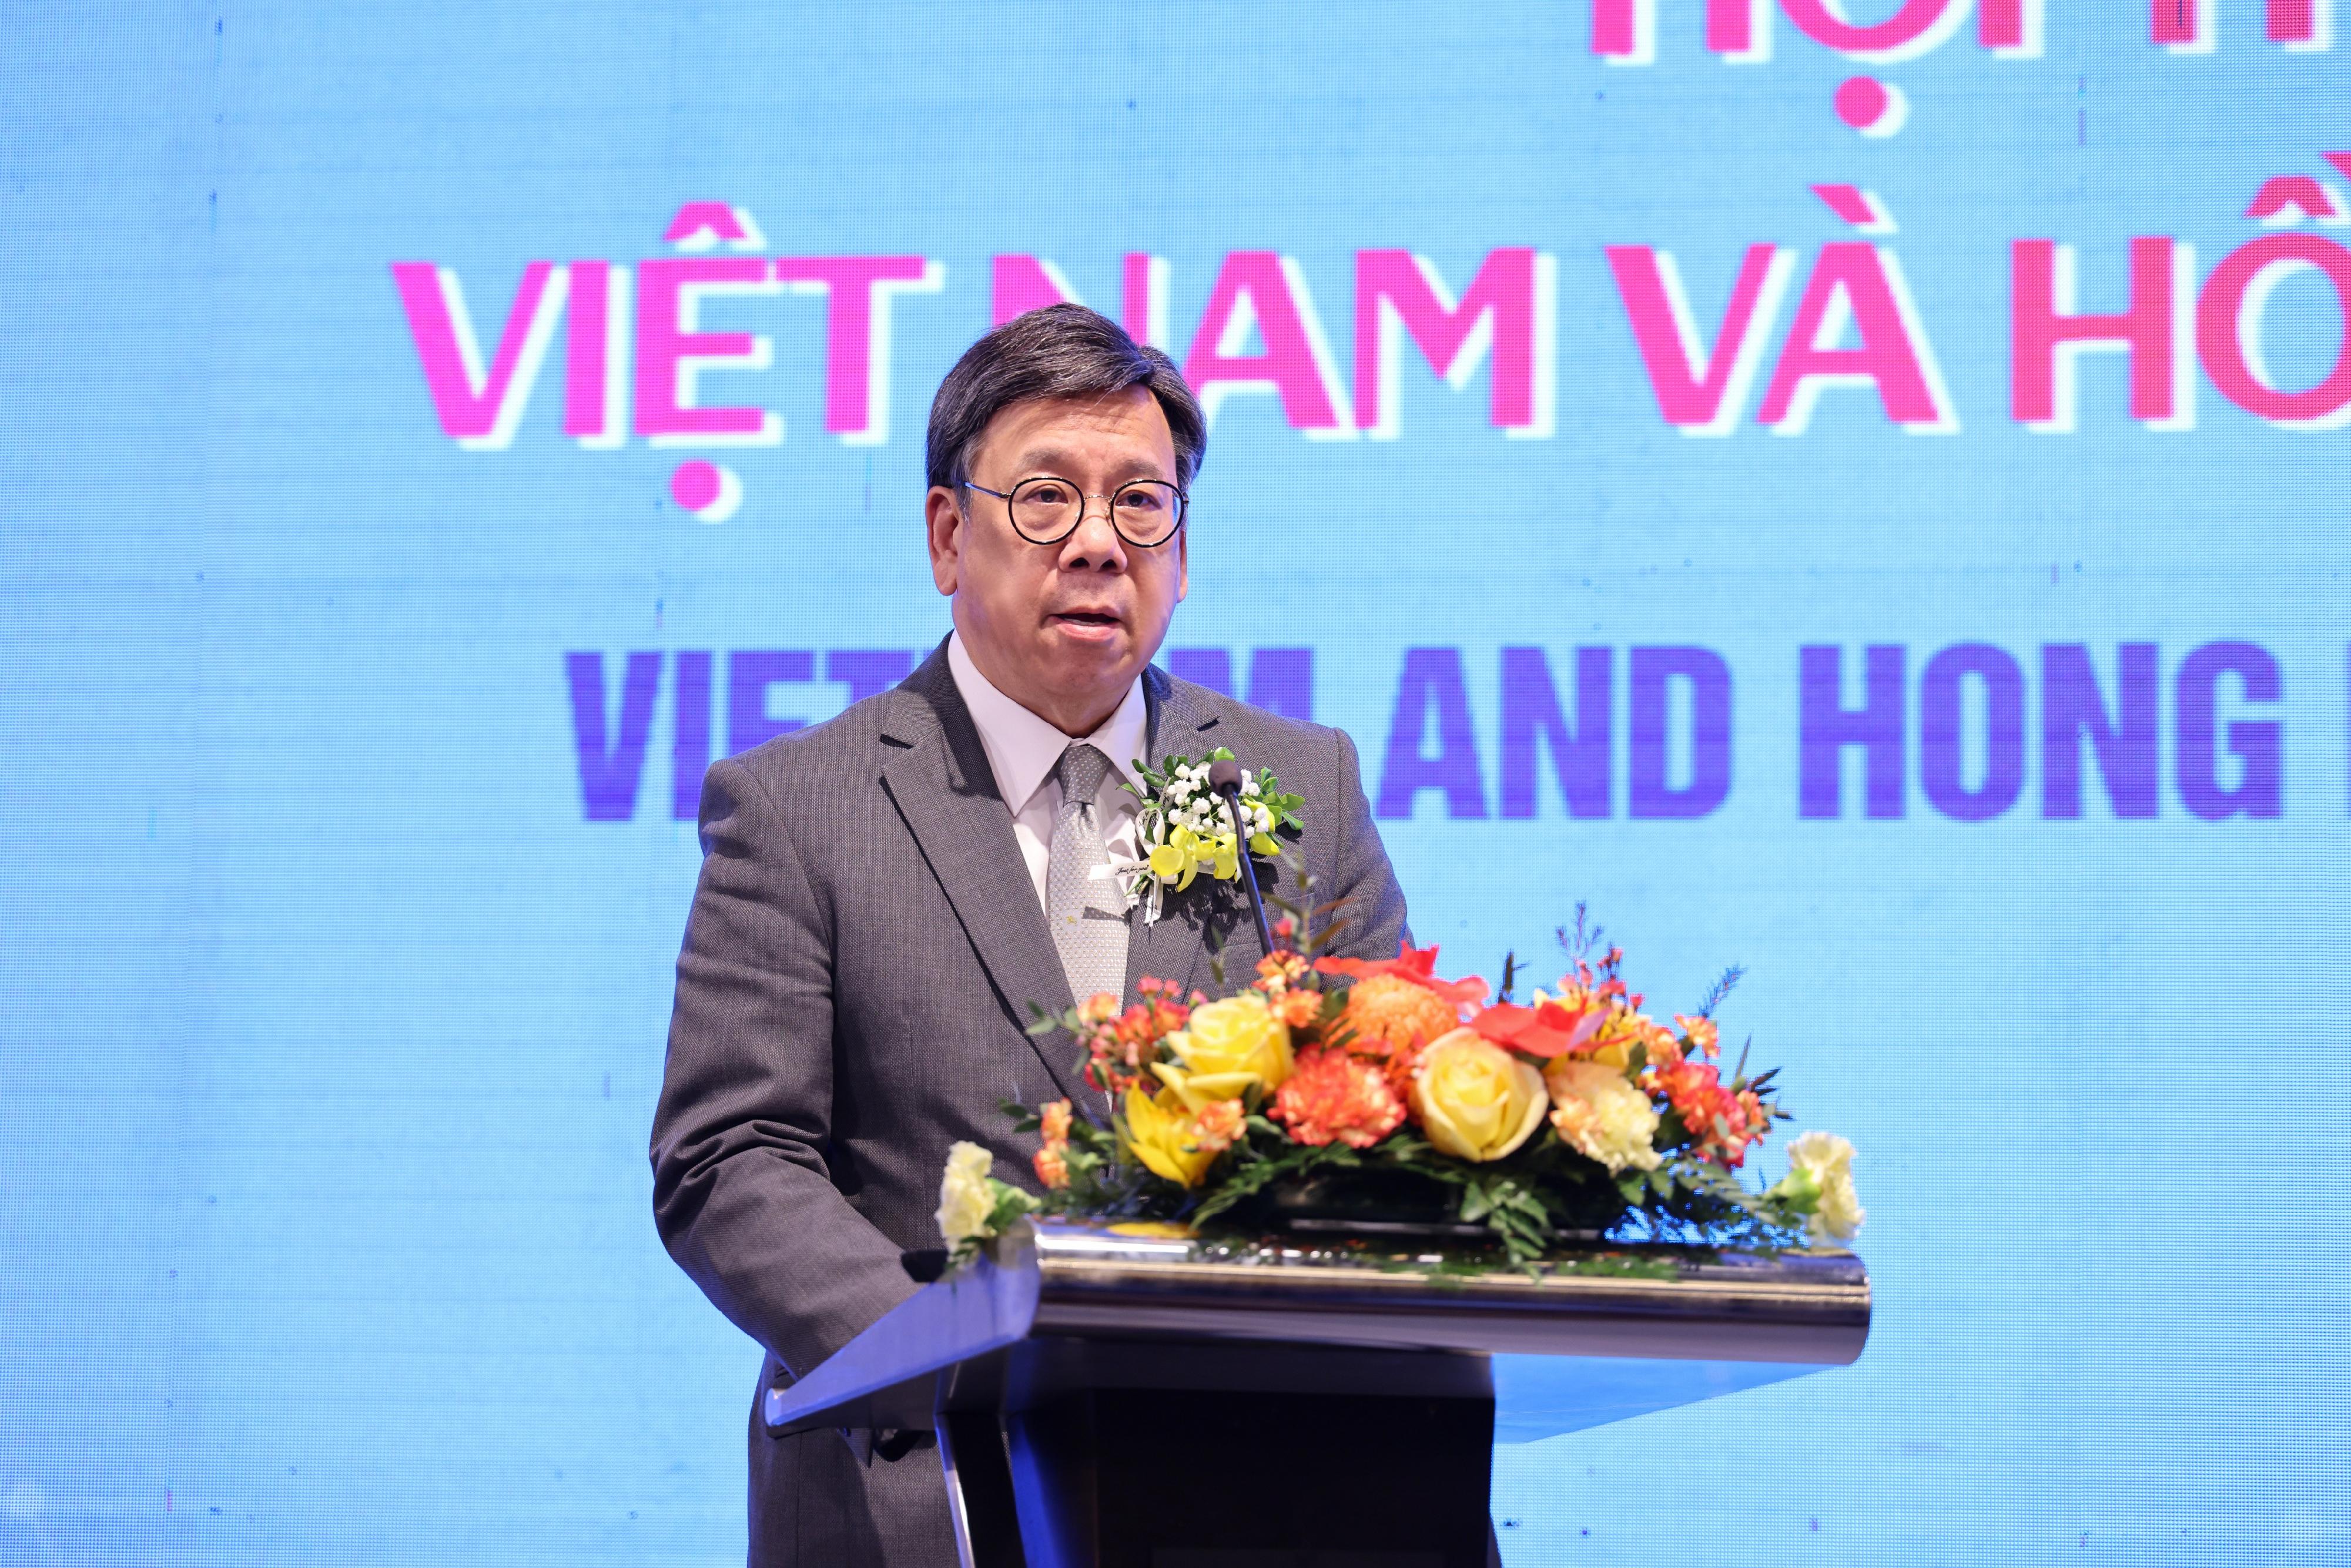 The Secretary for Commerce and Economic Development, Mr Algernon Yau, shared his insights with the Vietnamese political and business community on the latest trade and economic developments in Hong Kong, especially the new measures to attract enterprises and investments, at a business forum and networking luncheon in Hanoi, Vietnam, today (January 10). Photo shows Mr Yau speaking at the business forum and networking luncheon.